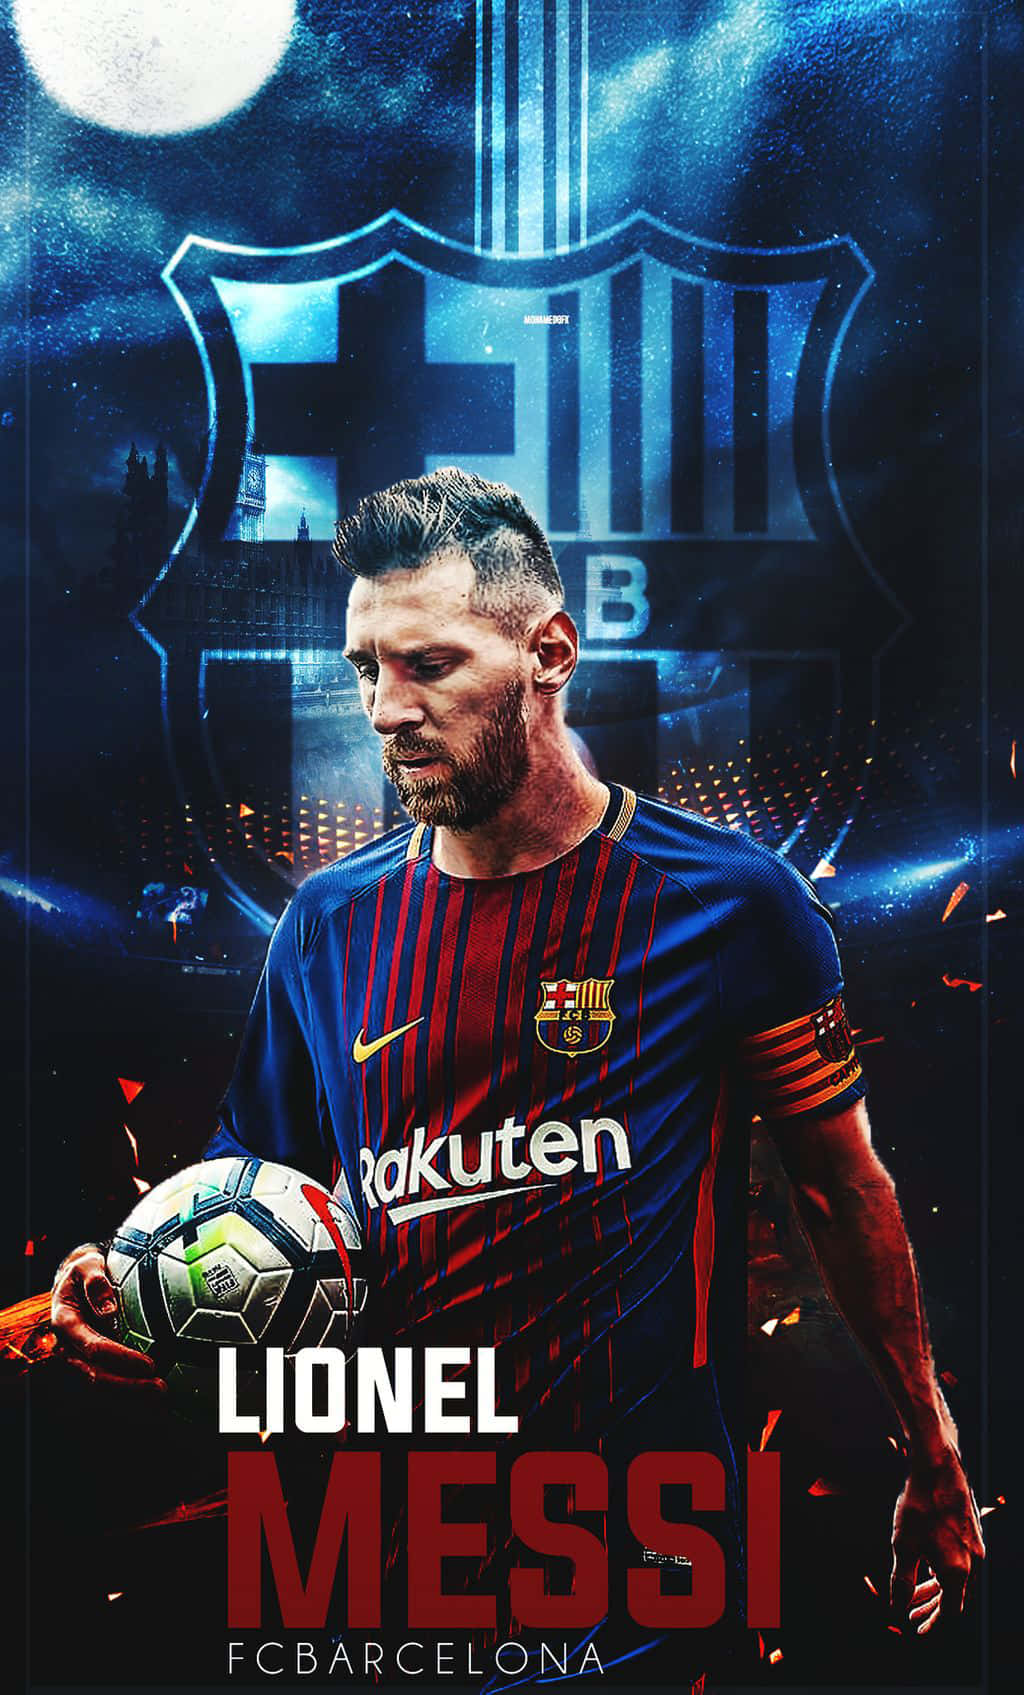 Messi | Latest & Breaking News on Messi | Photos, Videos, Breaking Stories  and Articles on Messi